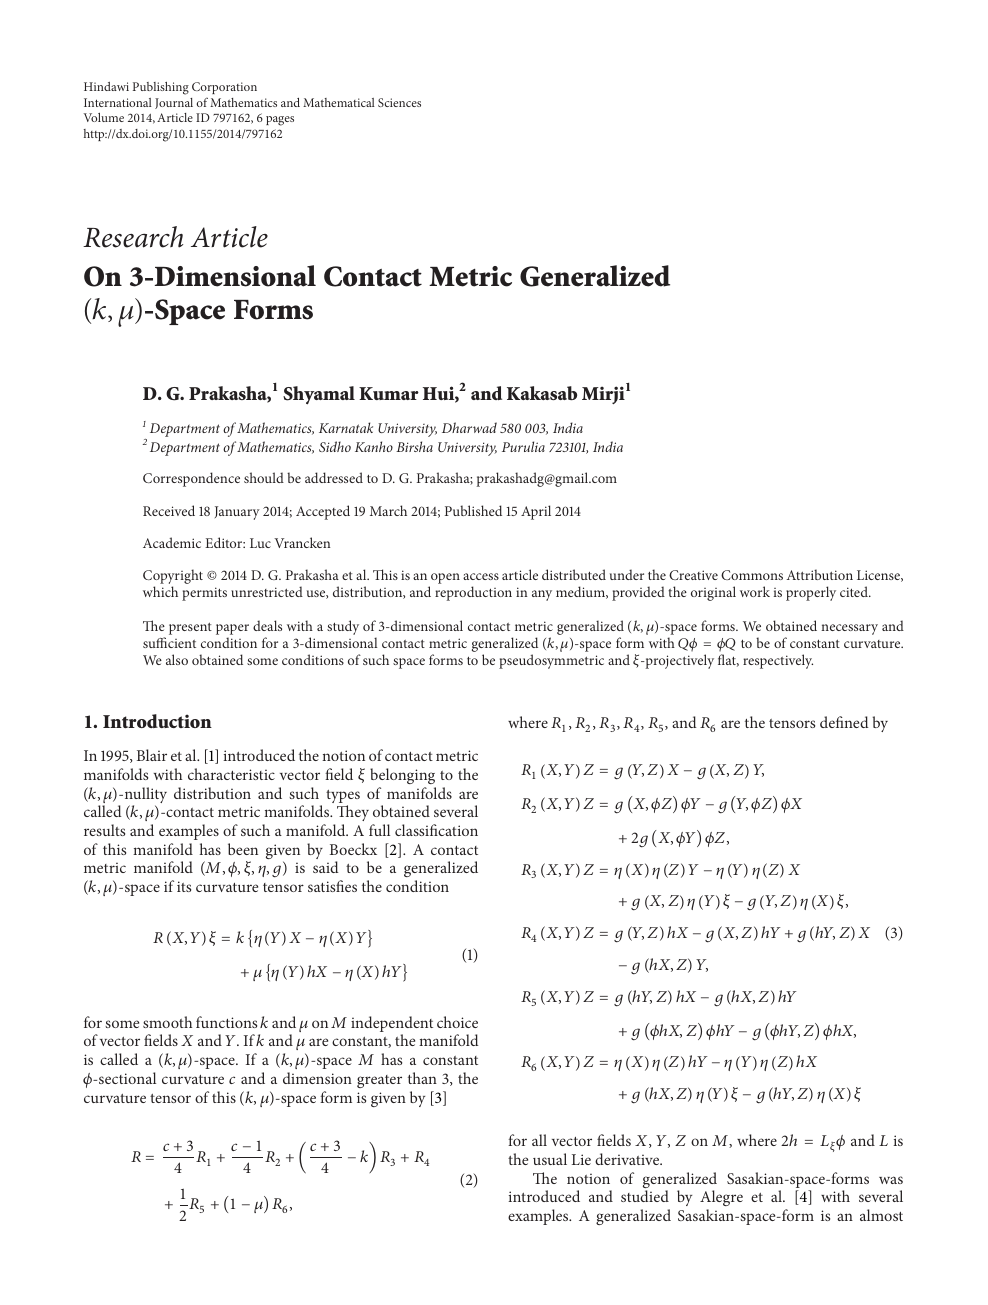 On 3 Dimensional Contact Metric Generalized K M Space Forms Topic Of Research Paper In Mathematics Download Scholarly Article Pdf And Read For Free On Cyberleninka Open Science Hub